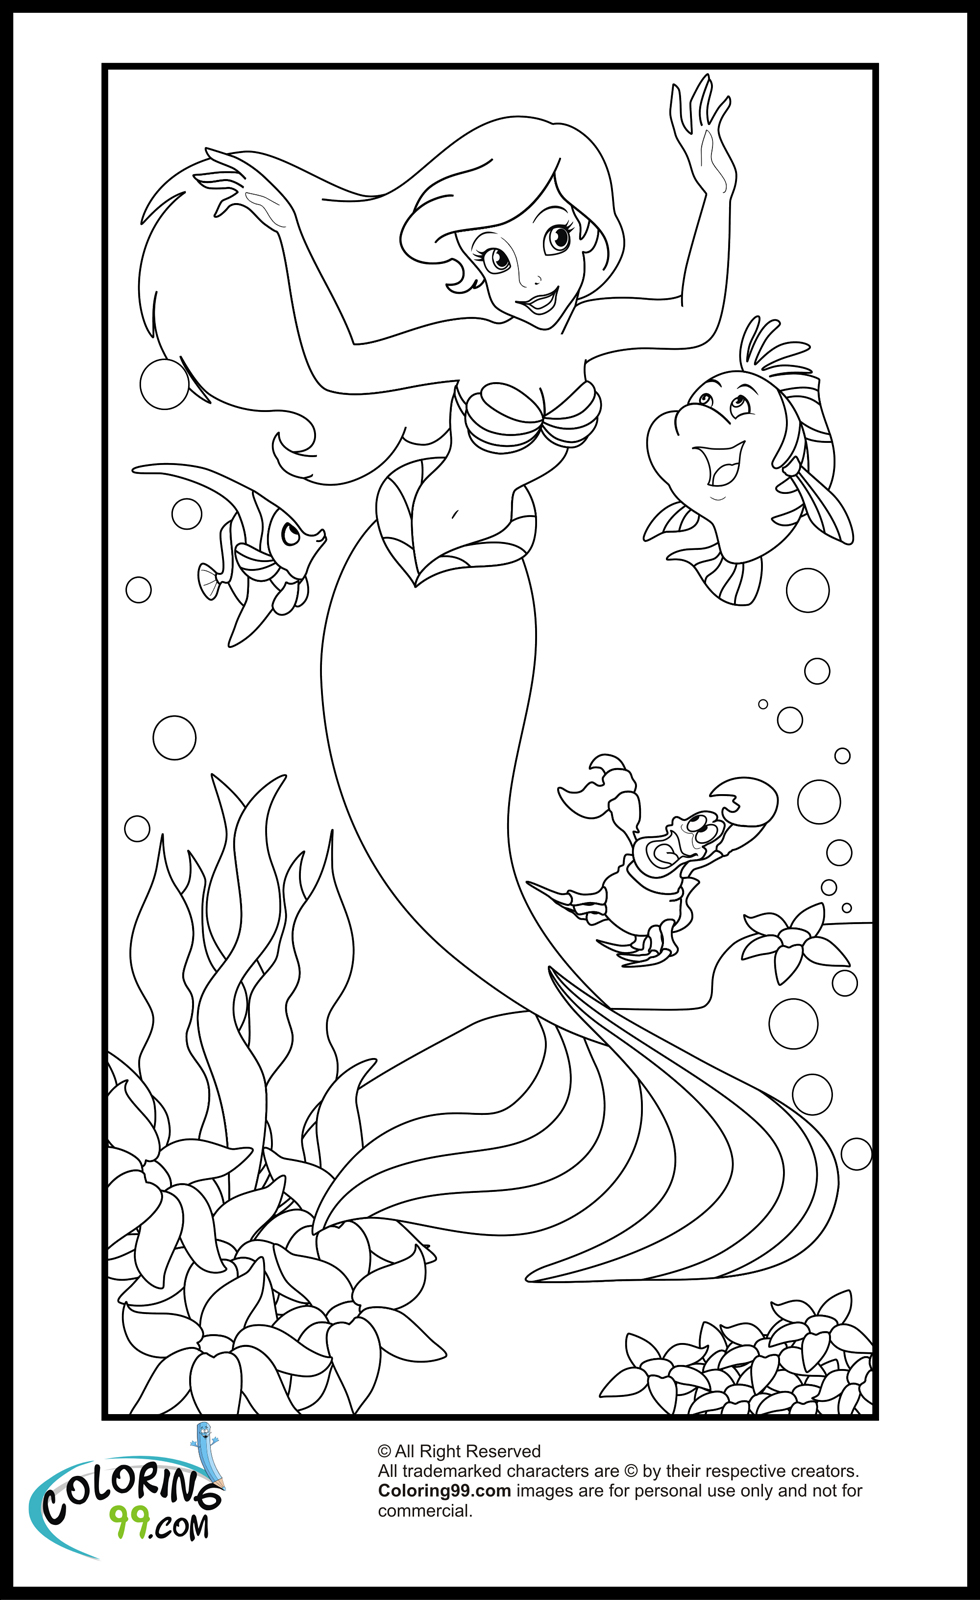 Download Disney Princess Ariel Coloring Pages | Minister Coloring